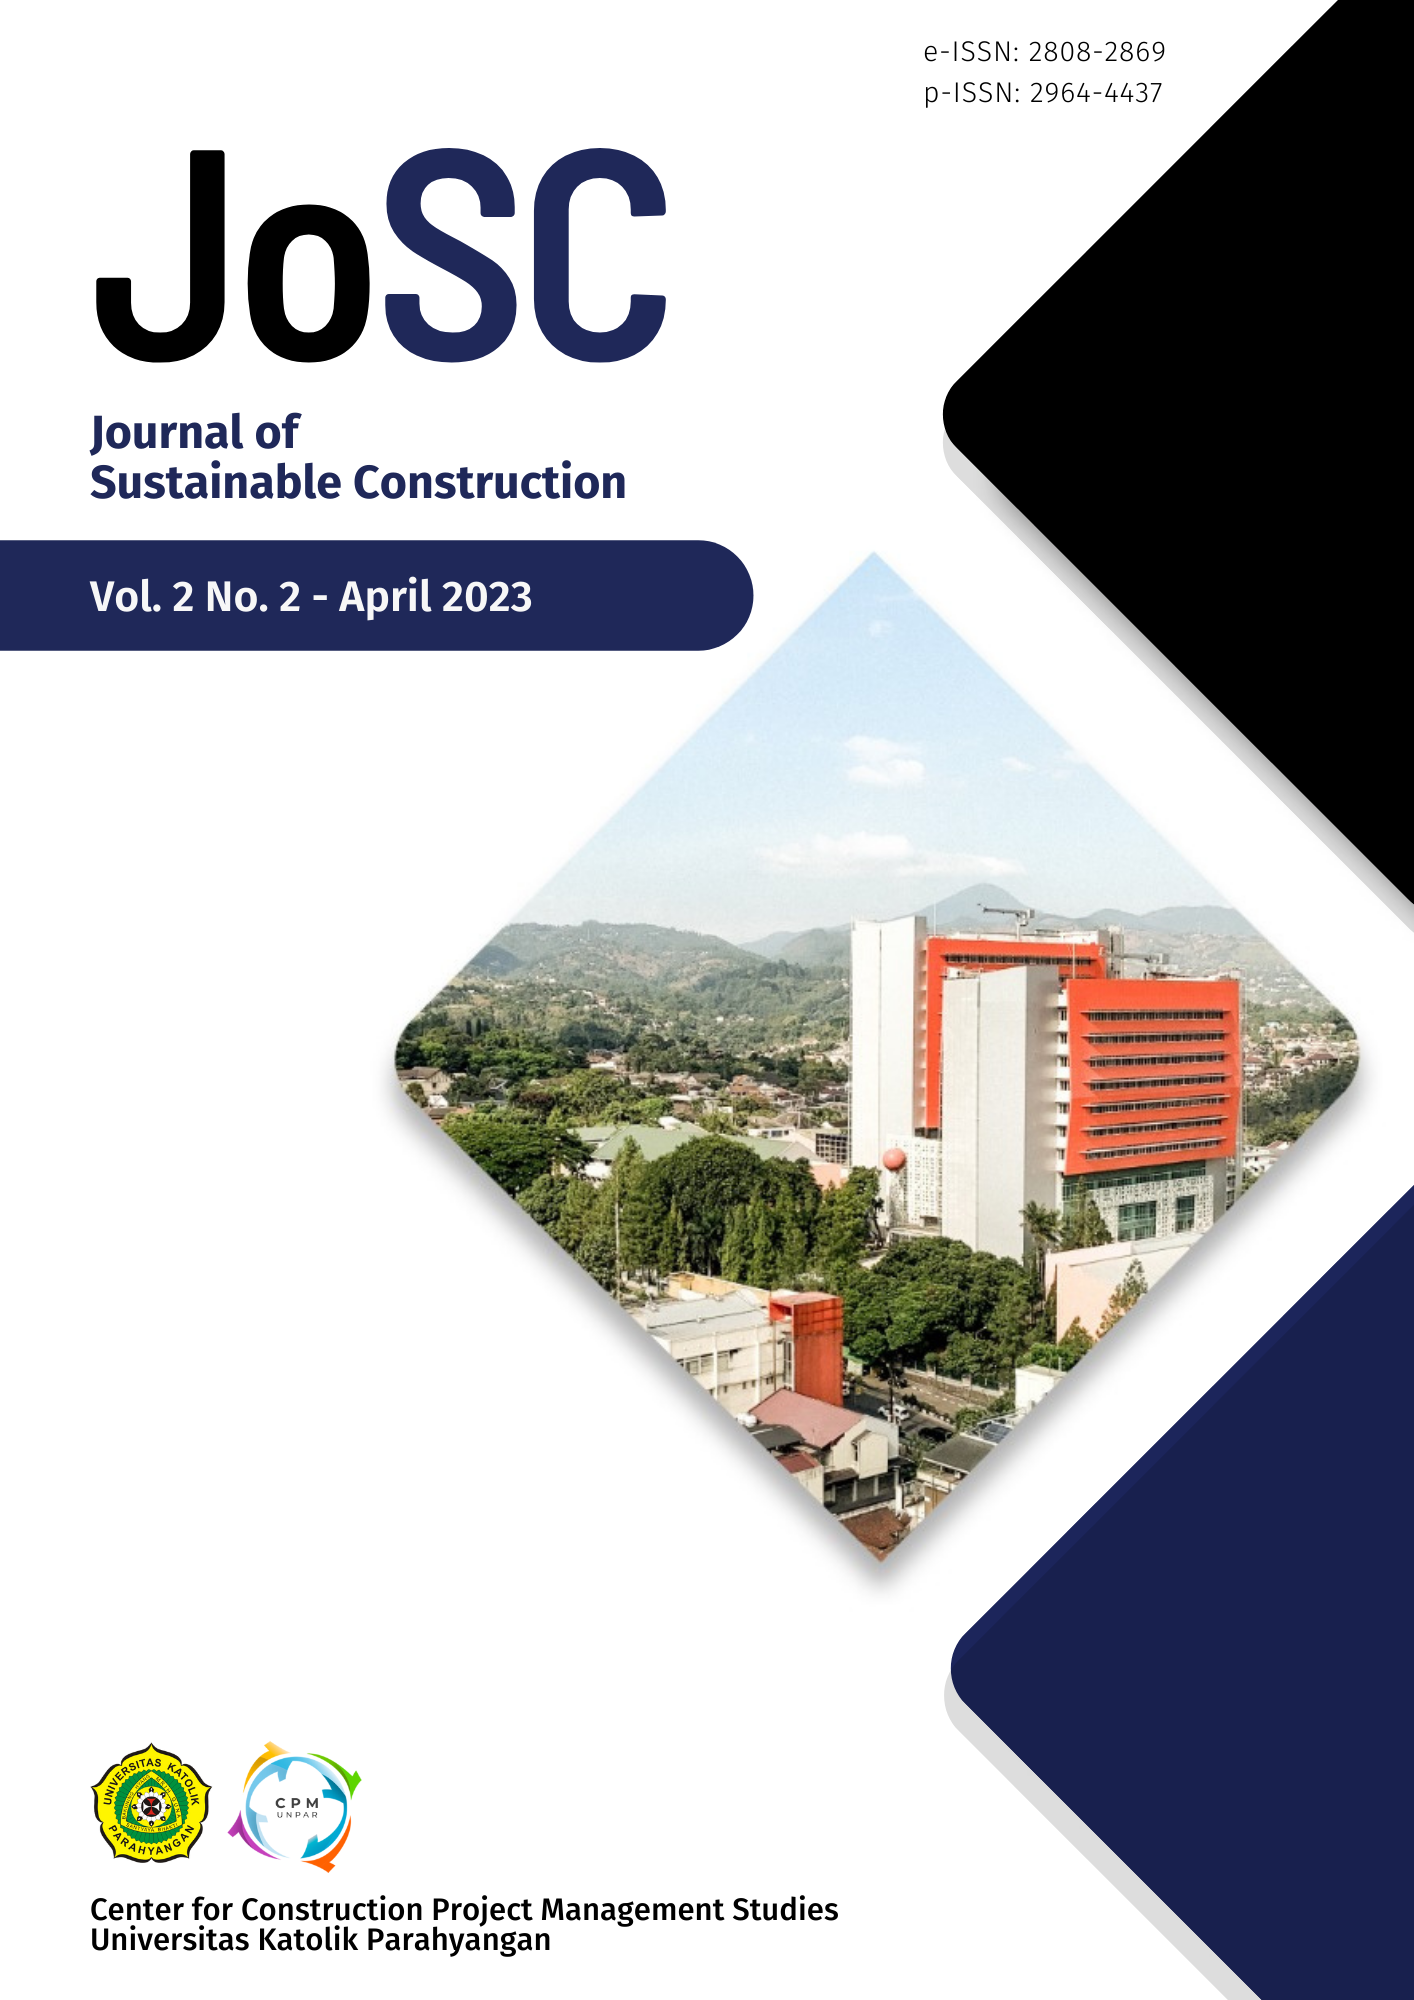 					Lihat Vol 2 No 2 (2023): Journal of Sustainable Construction
				